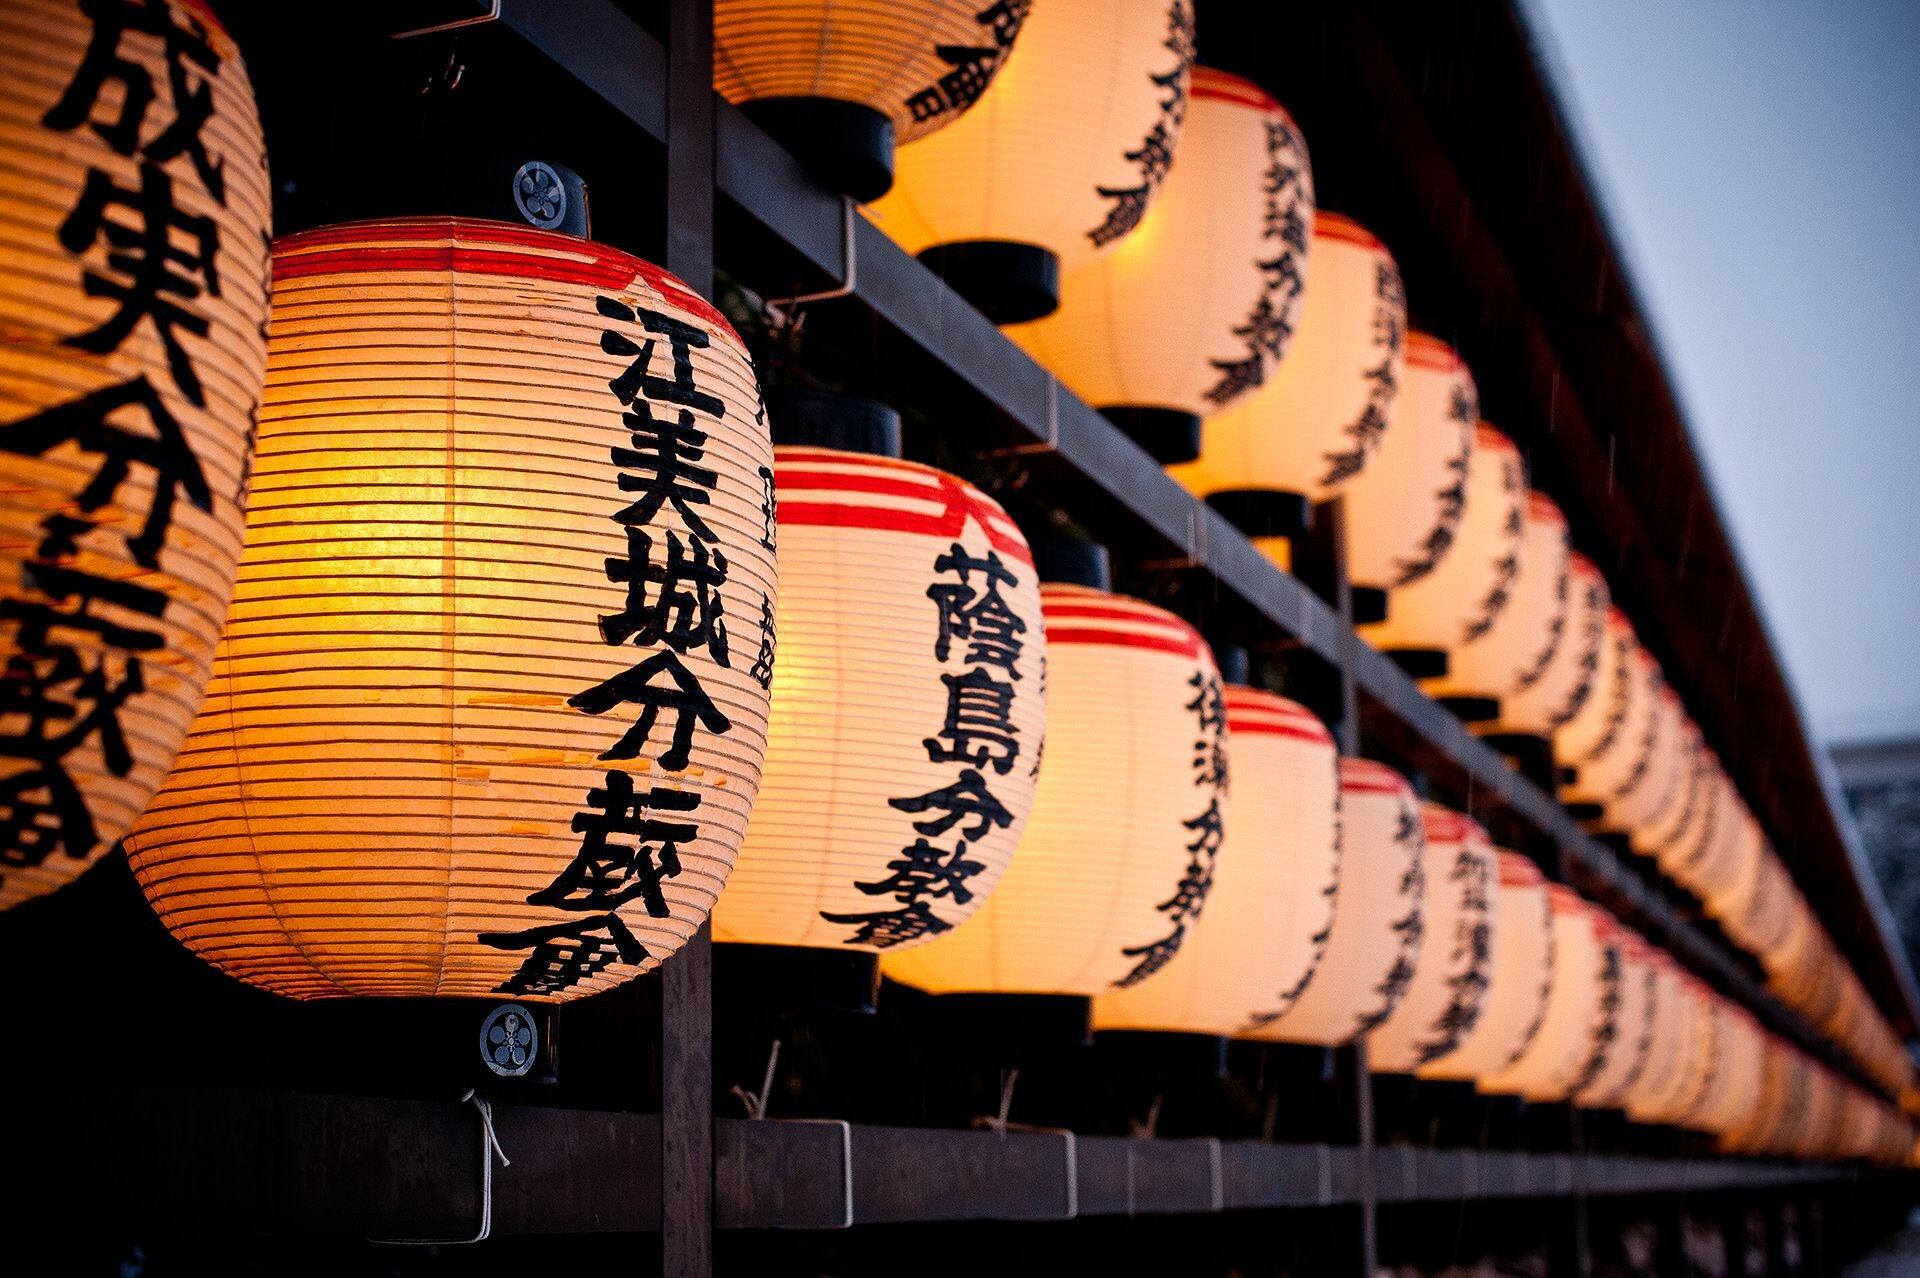 Lanterns: Japanese lamps, The chamber that contains the light. 1920x1280 HD Wallpaper.